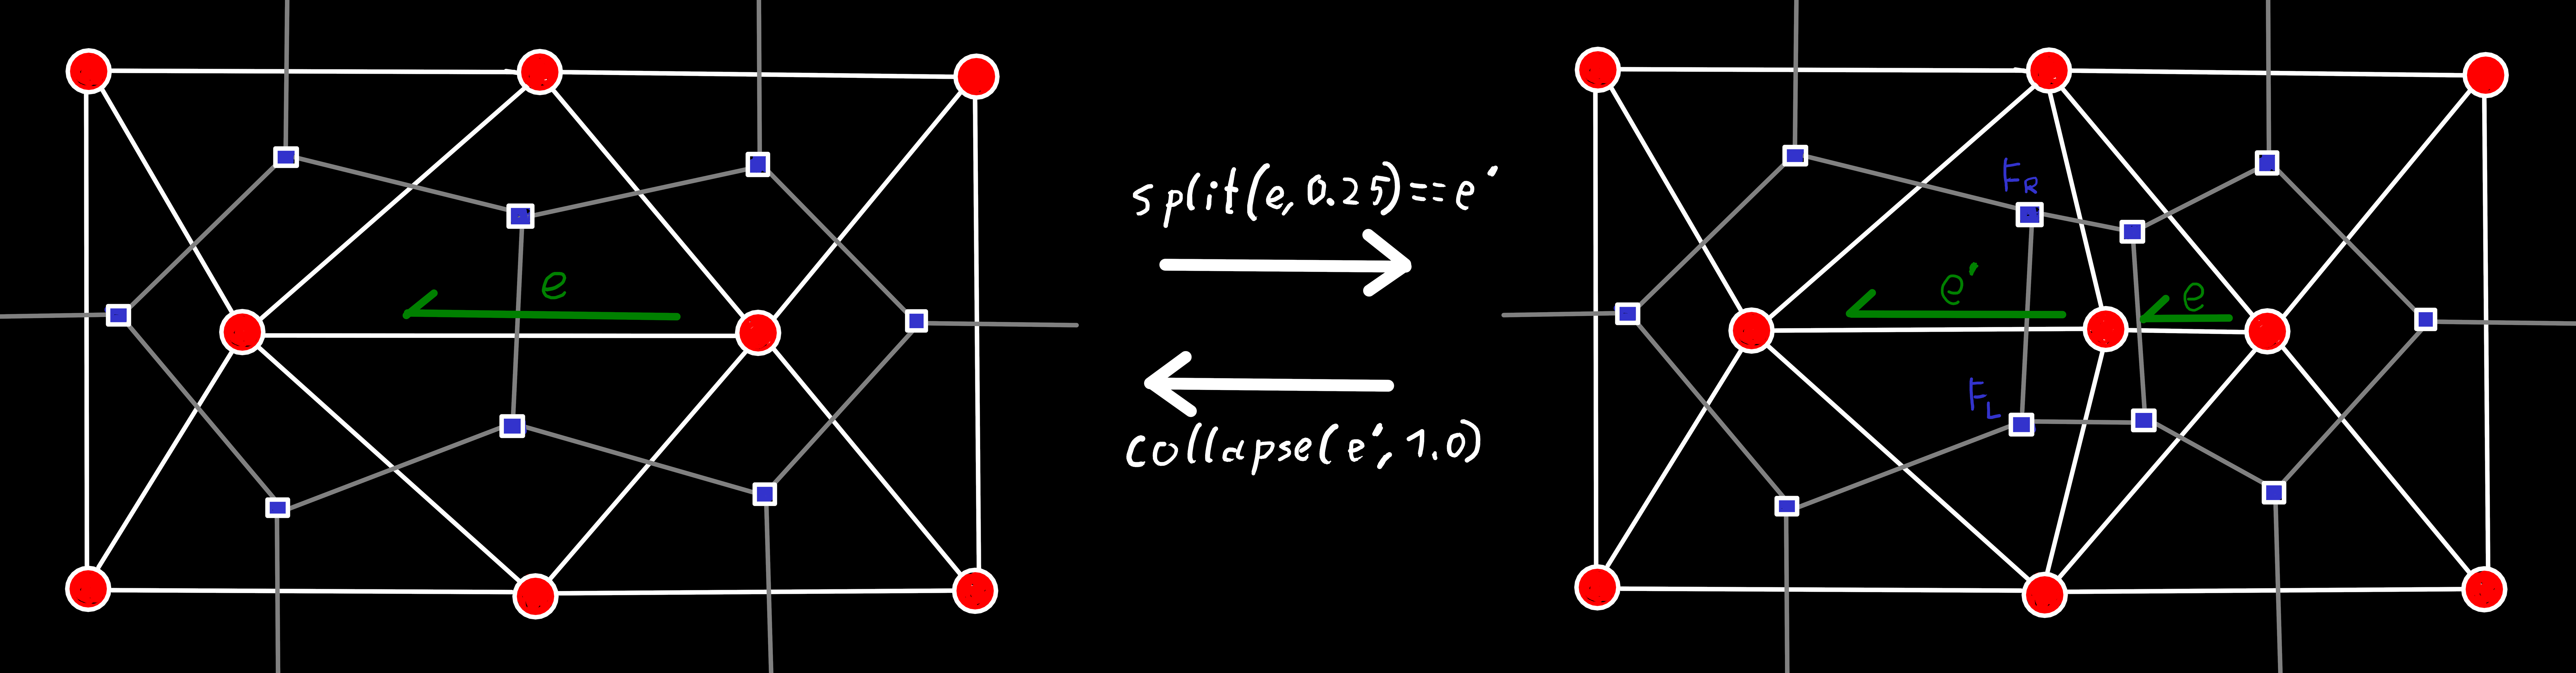 example of splitting and collapsing an edge